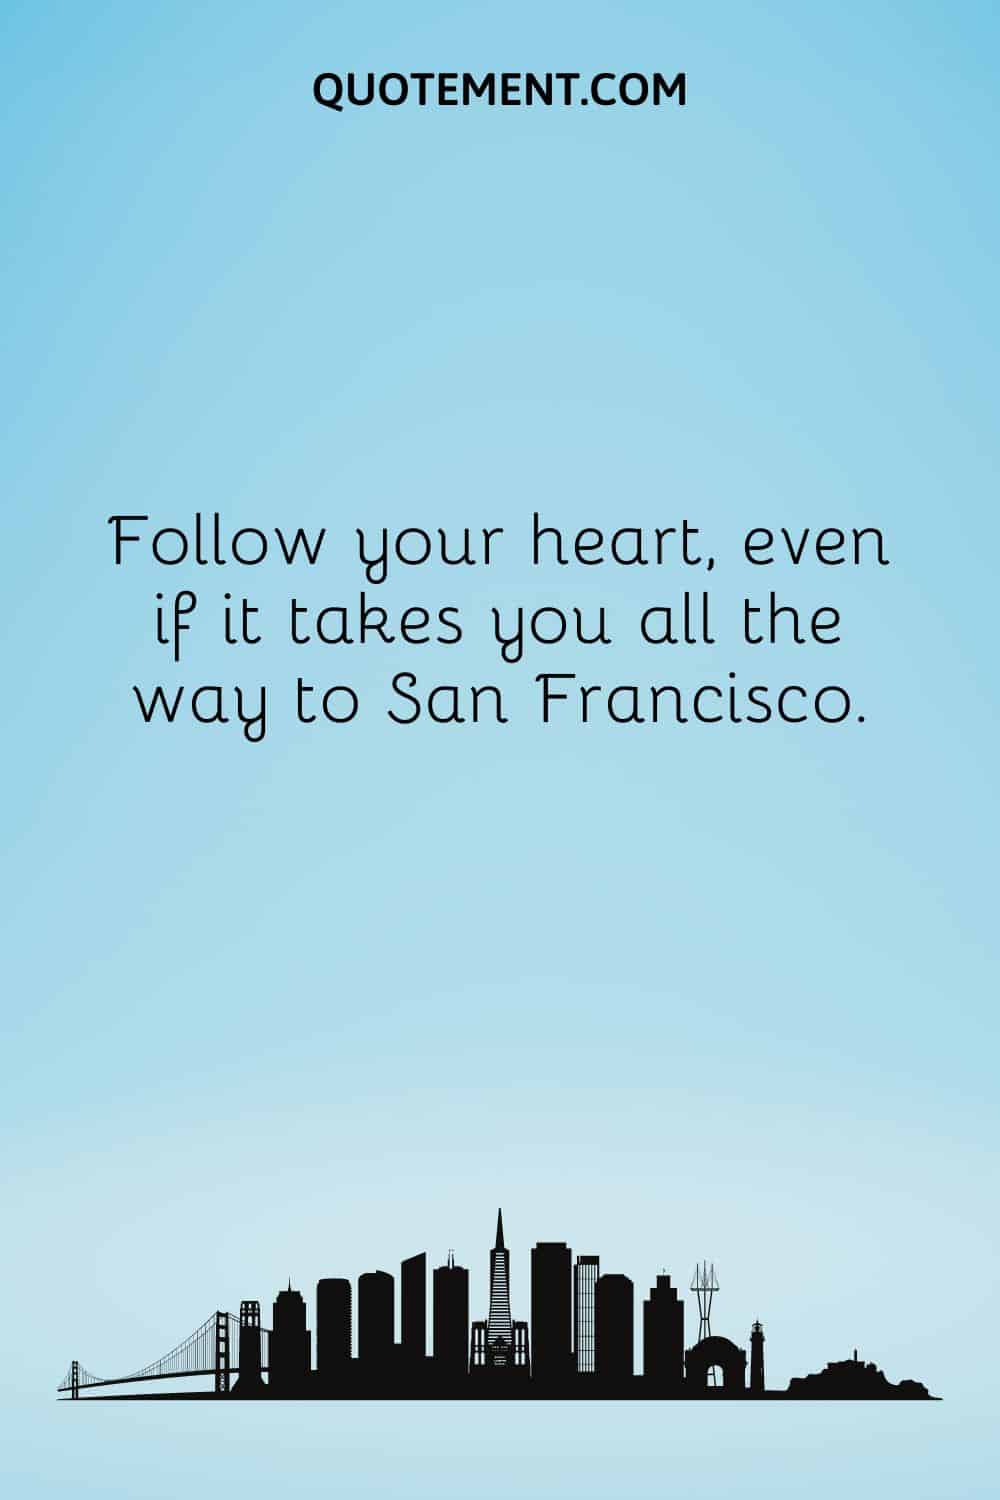 Follow your heart, even if it takes you all the way to San Francisco.
